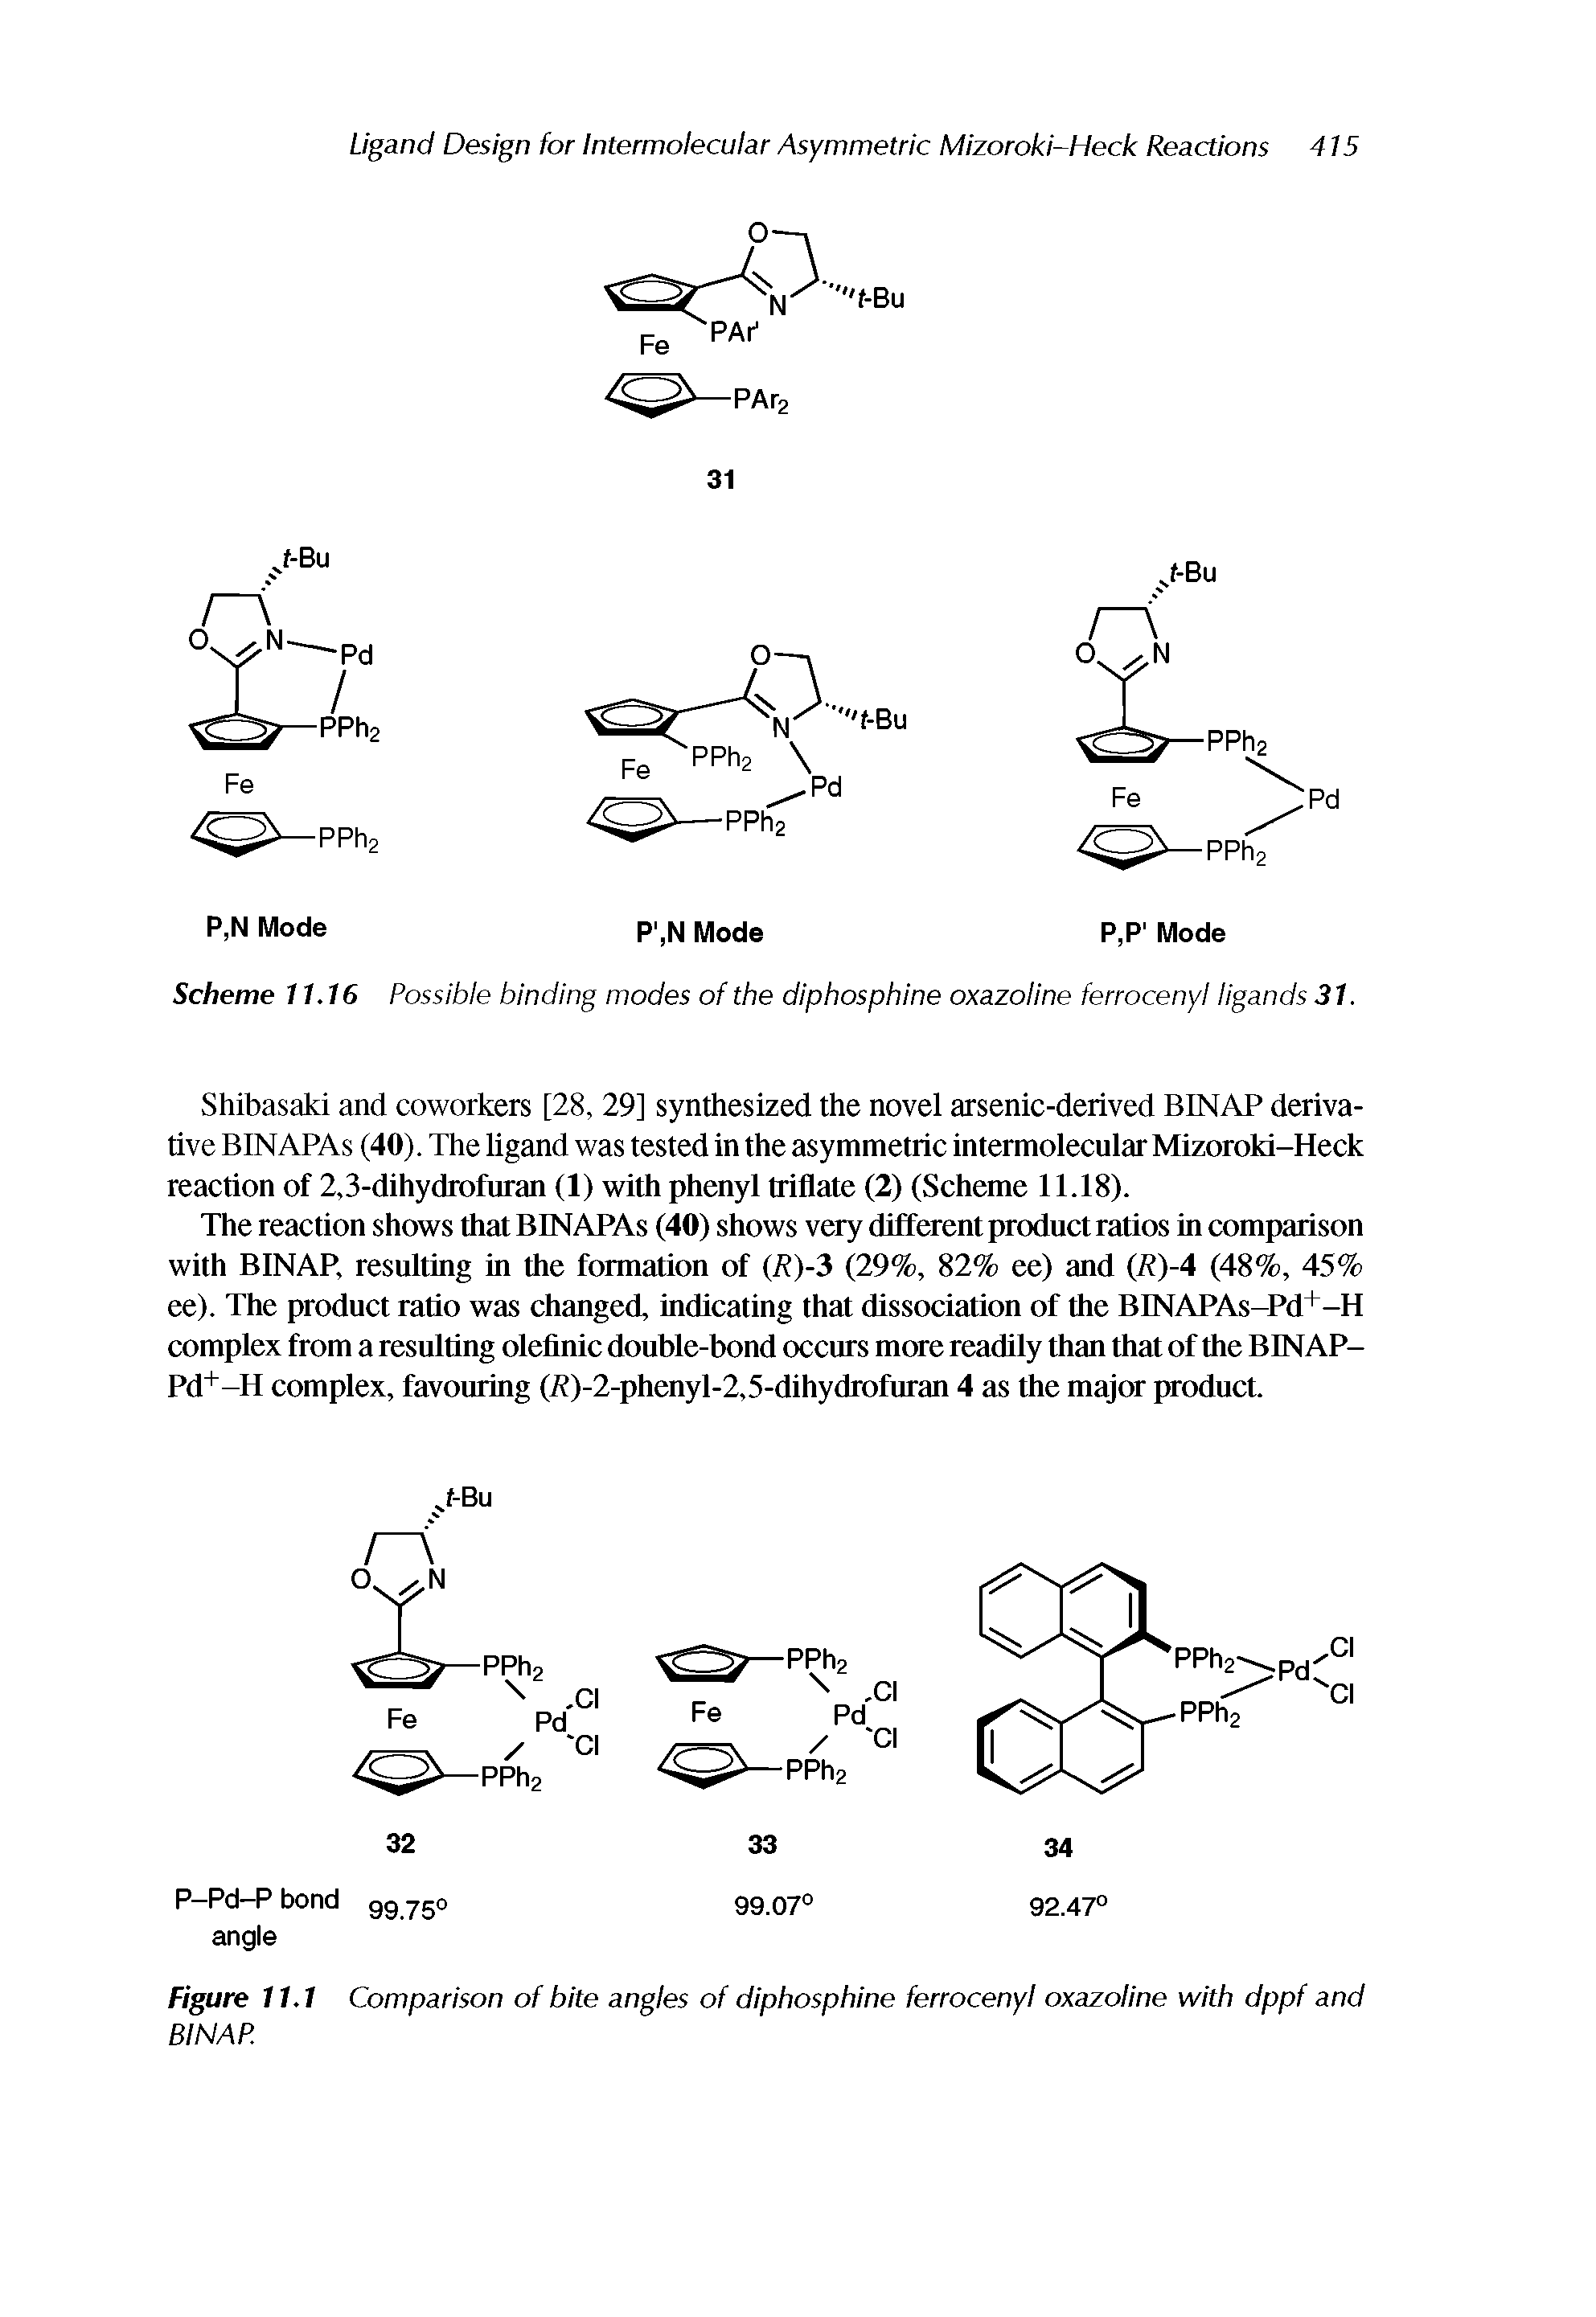 Scheme 11.16 Possible binding modes of the diphosphine oxazoline ferrocenyl ligands 31.